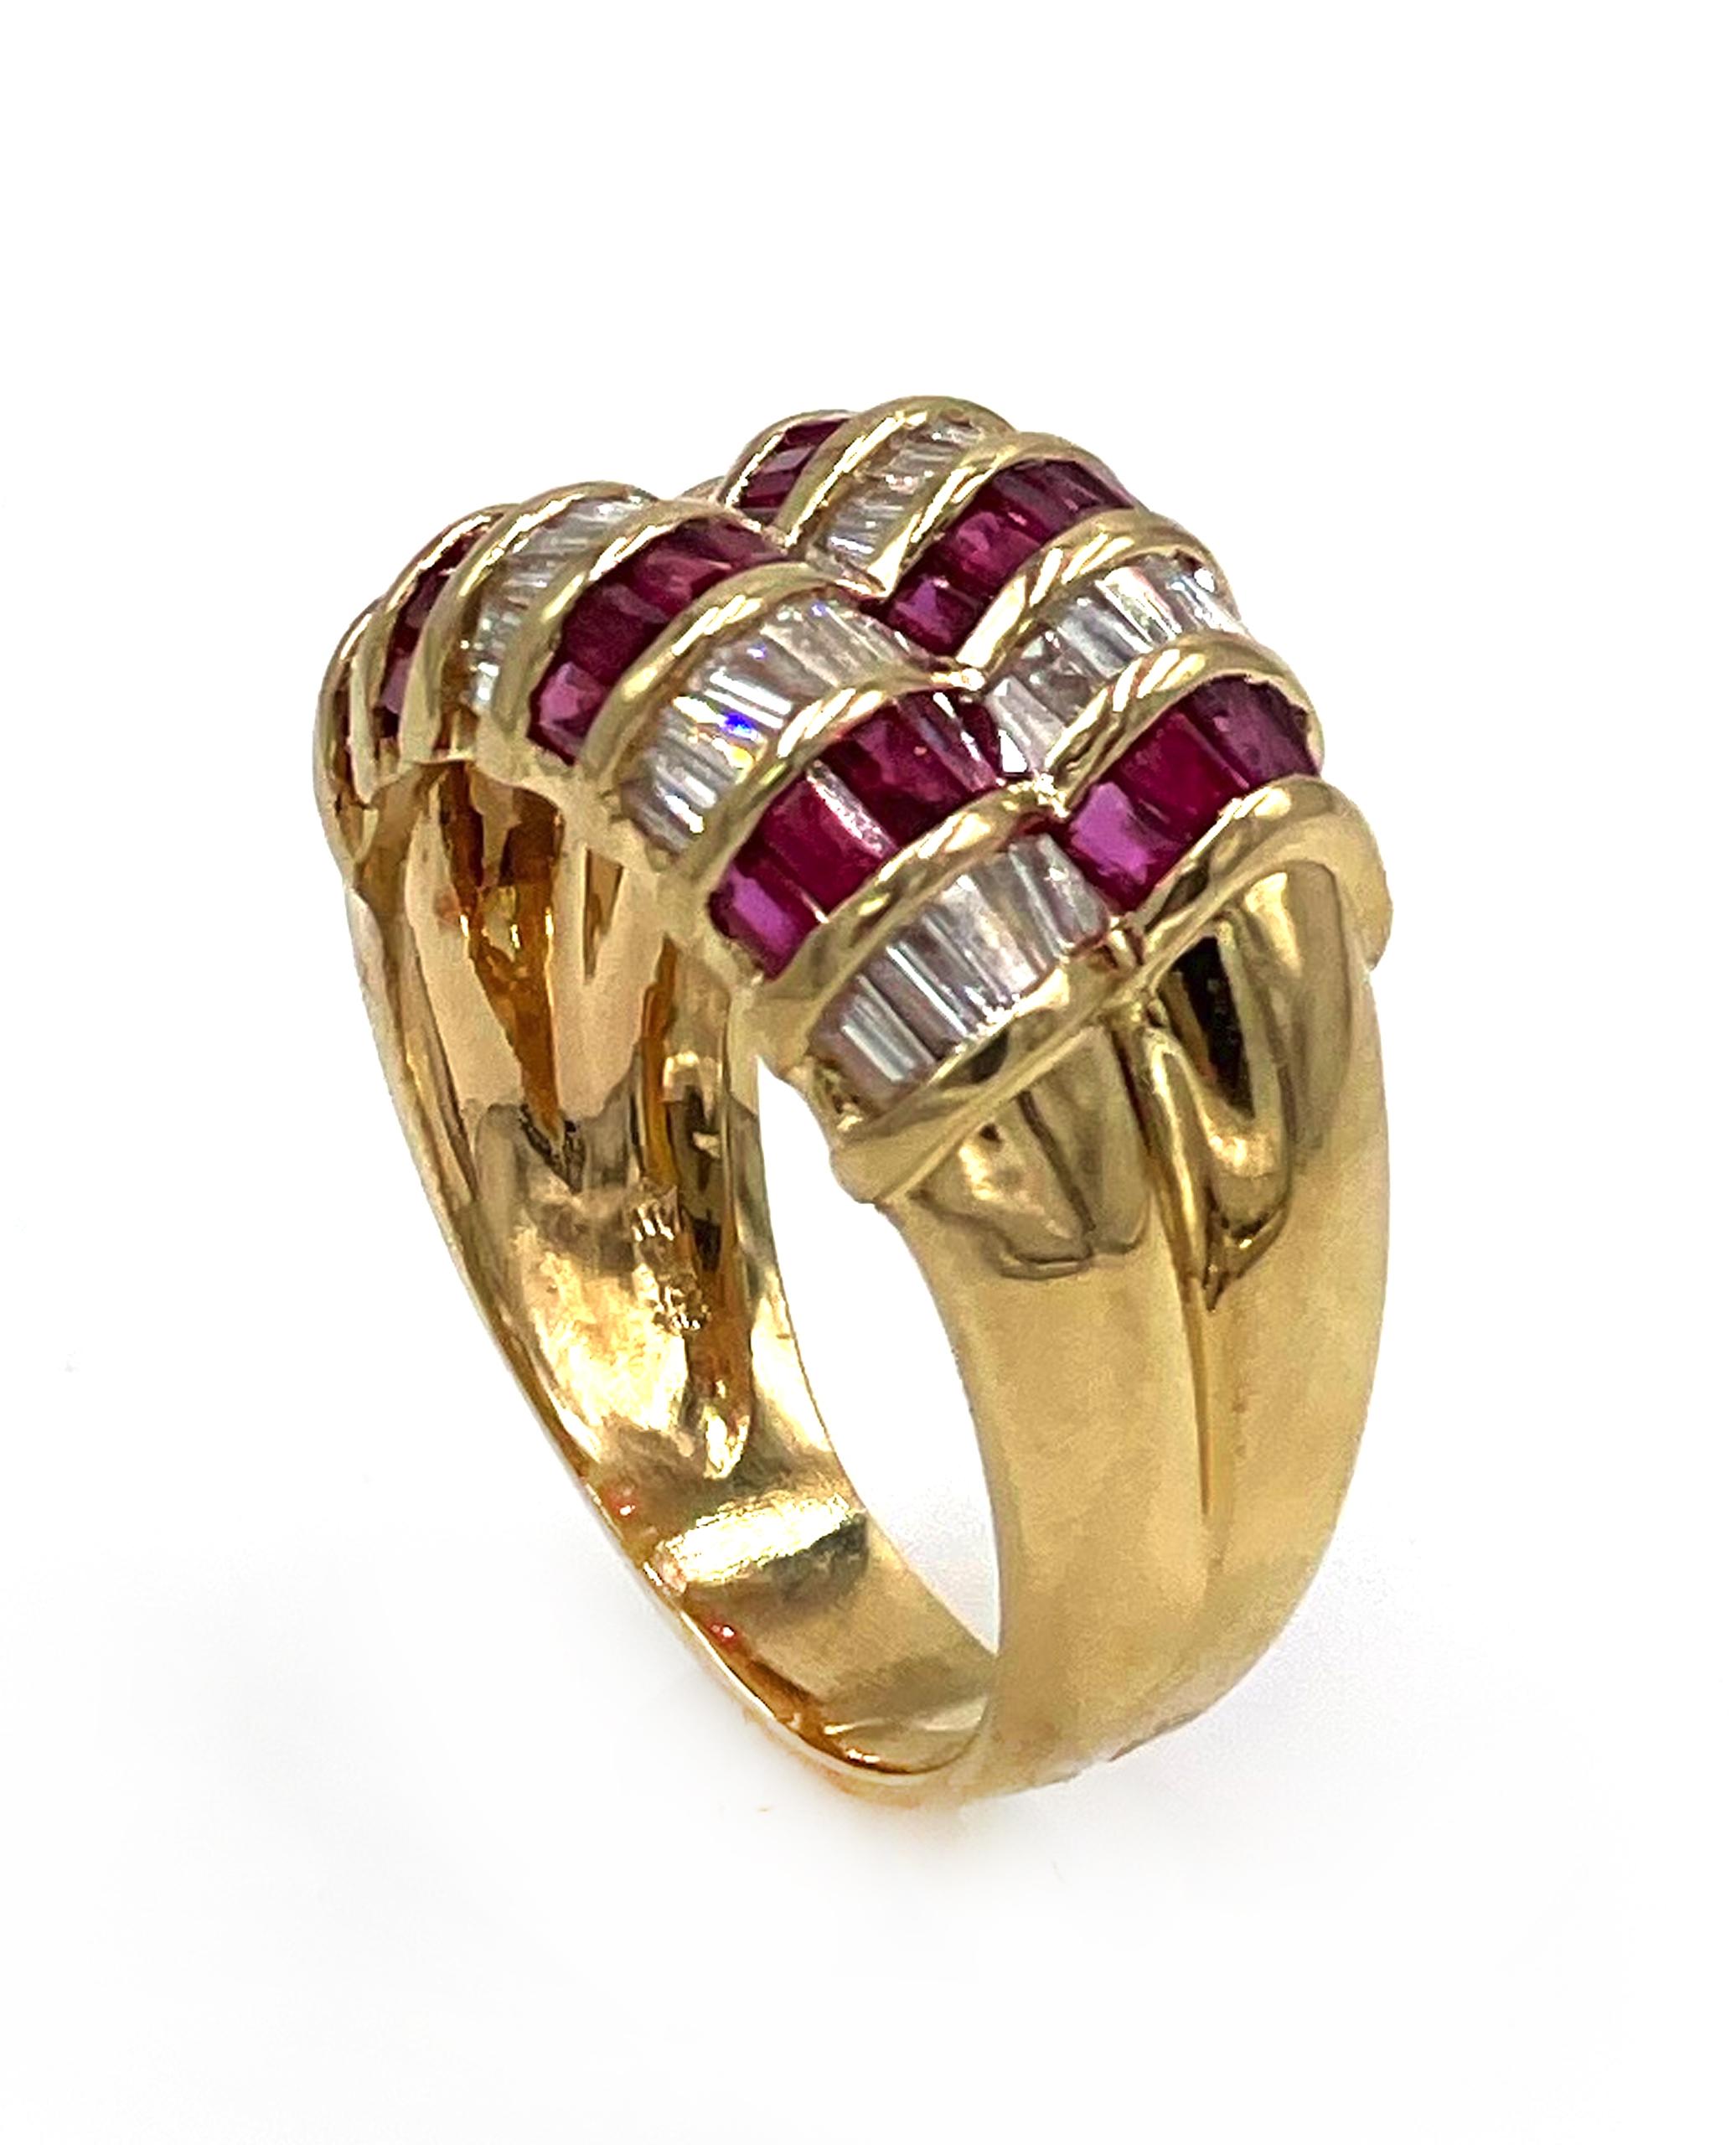 14K yellow gold ring with two rows of alternating baguette cut diamonds and rubies.

- Finger size 7.5
- Rubies weigh 2.29 carats total weight.
- Diamonds weigh 2.30 carats total weight.
- Diamonds are G/H color, VS2/SI1 clarity.
- Approximately